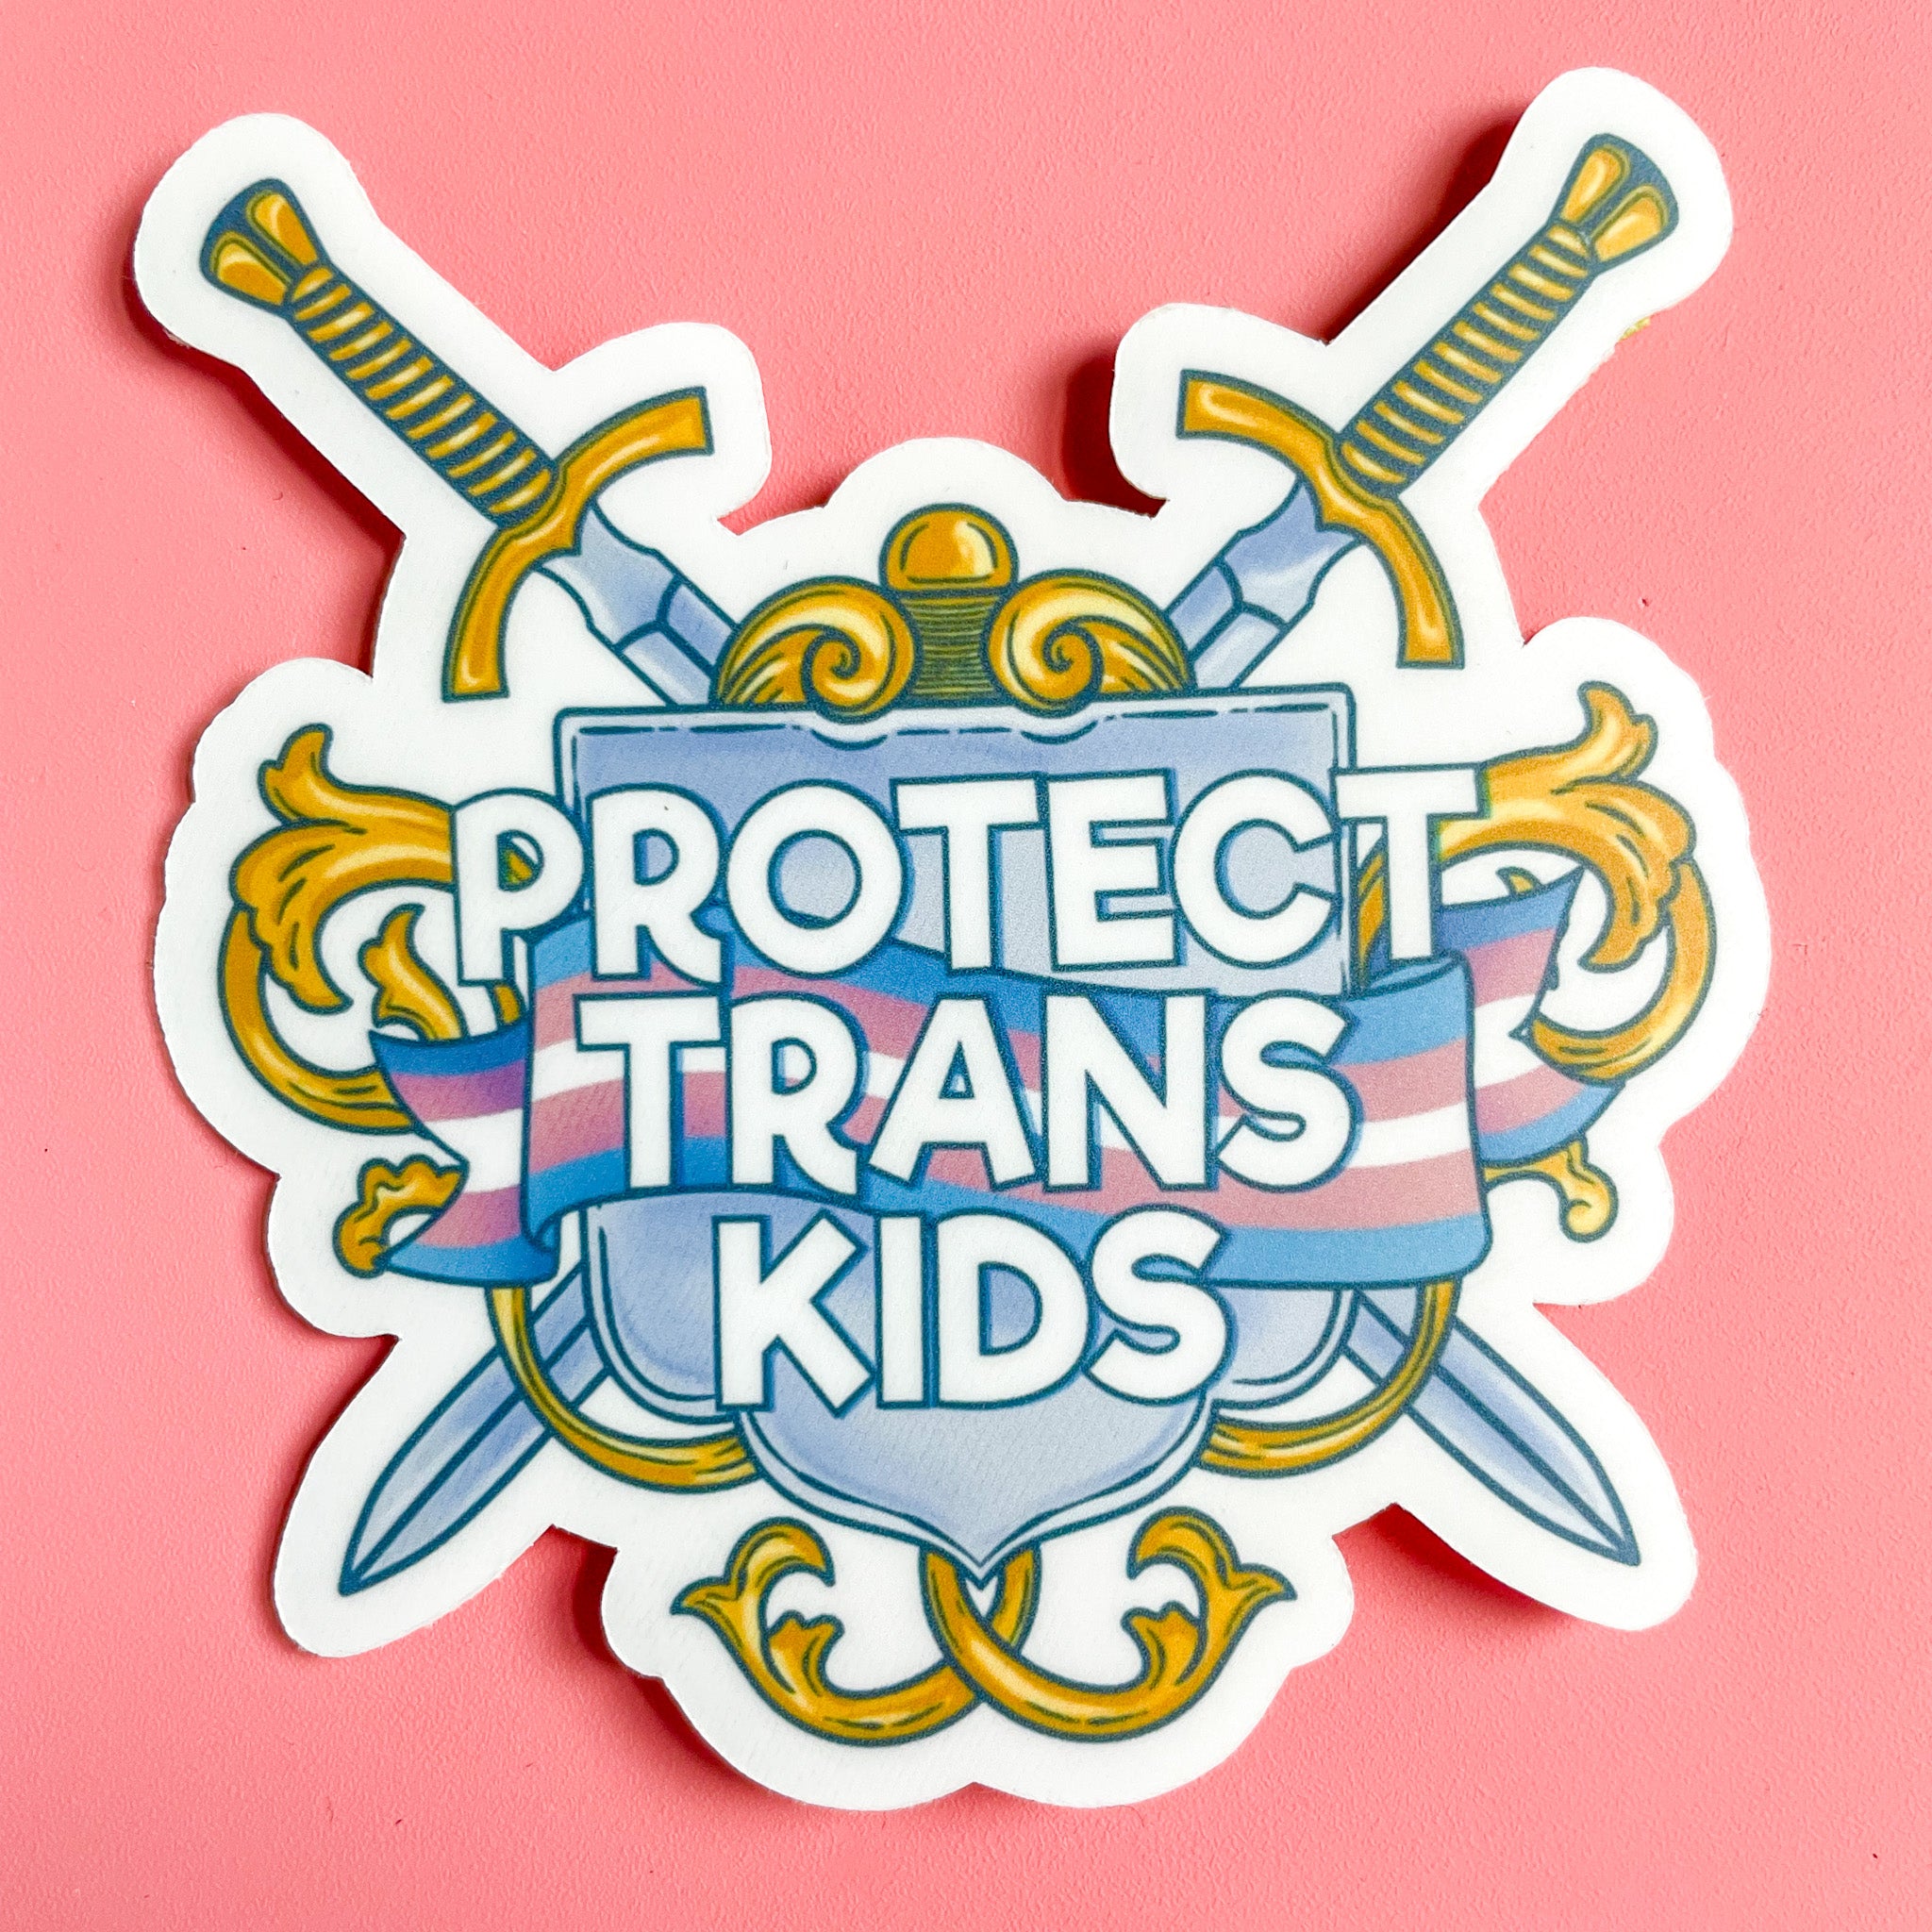 Protect Trans Kids Stickers